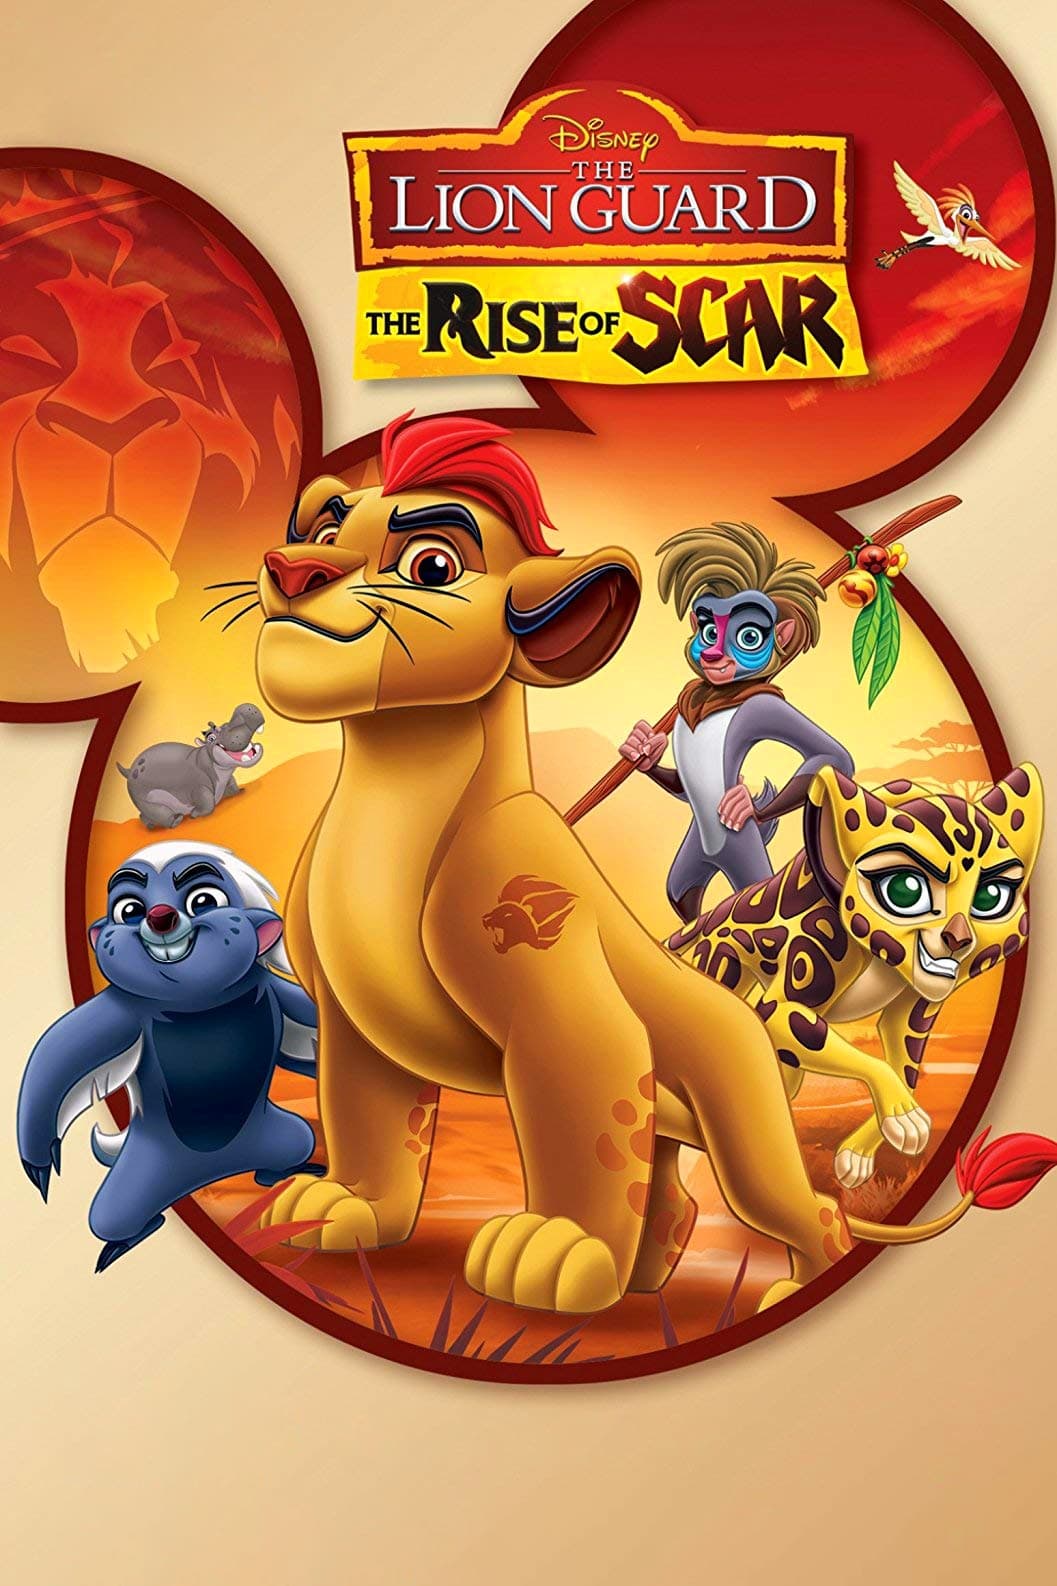 The Lion Guard: The Rise of Scar (2018)